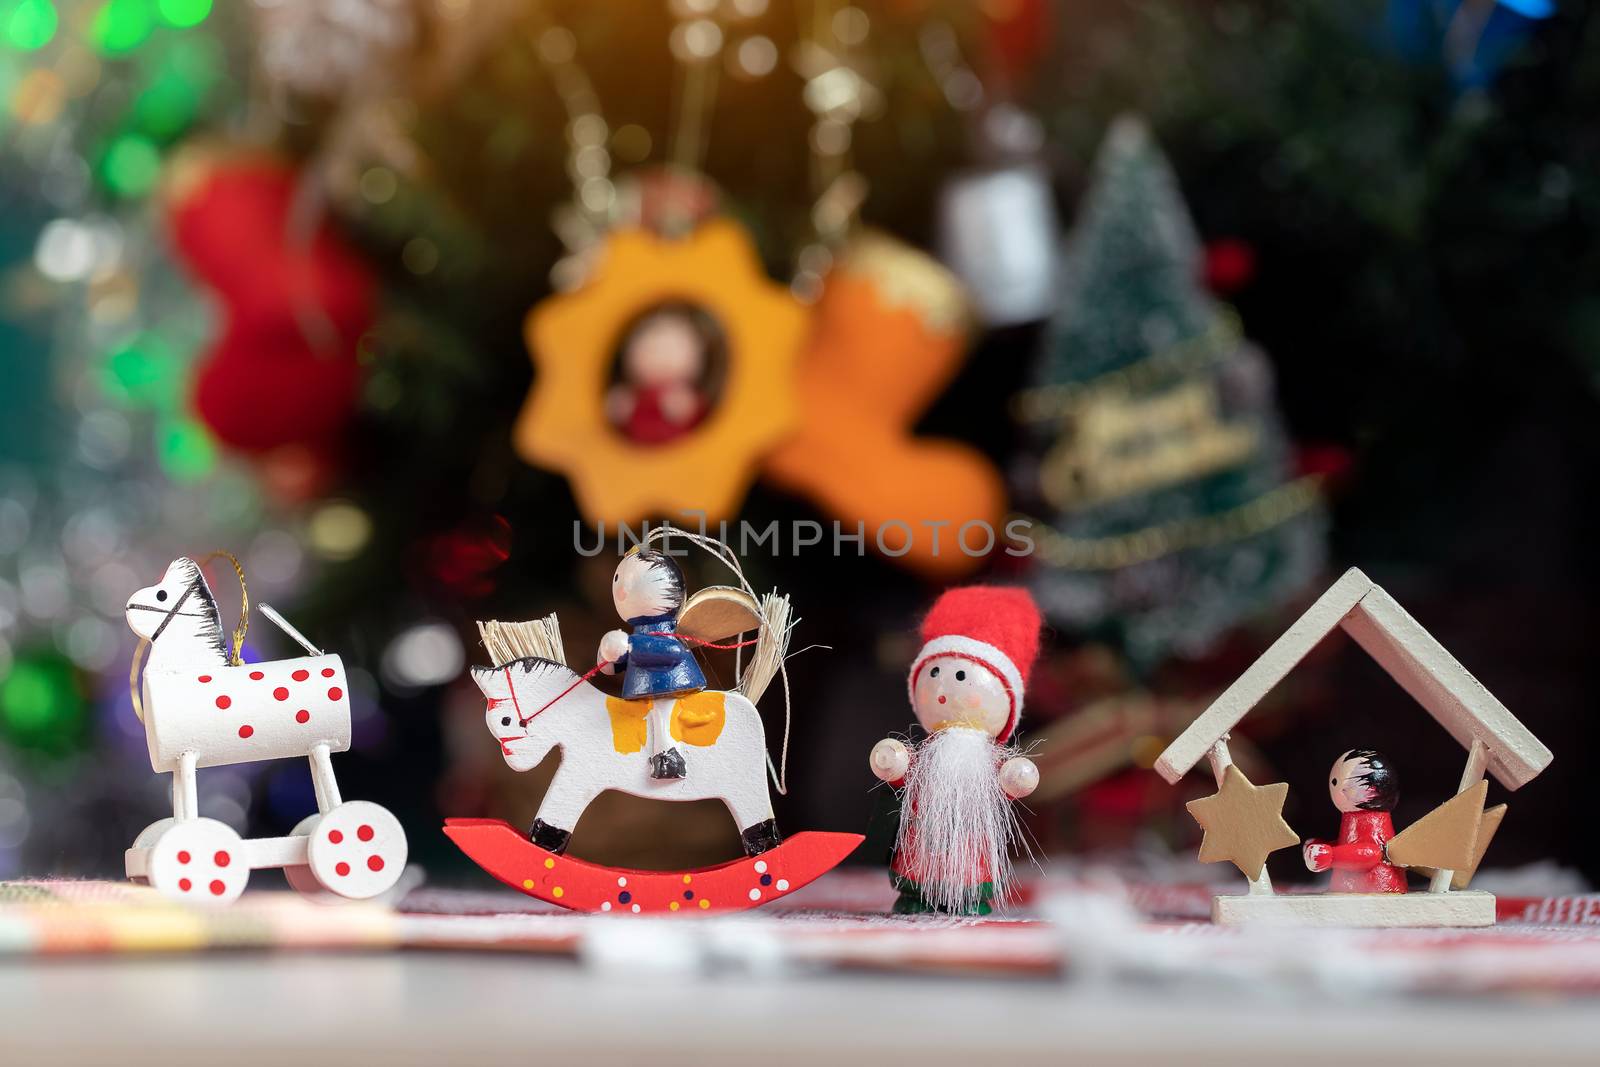 Christmas Background Of Defocused Lights With Decorated Tree by freedomnaruk